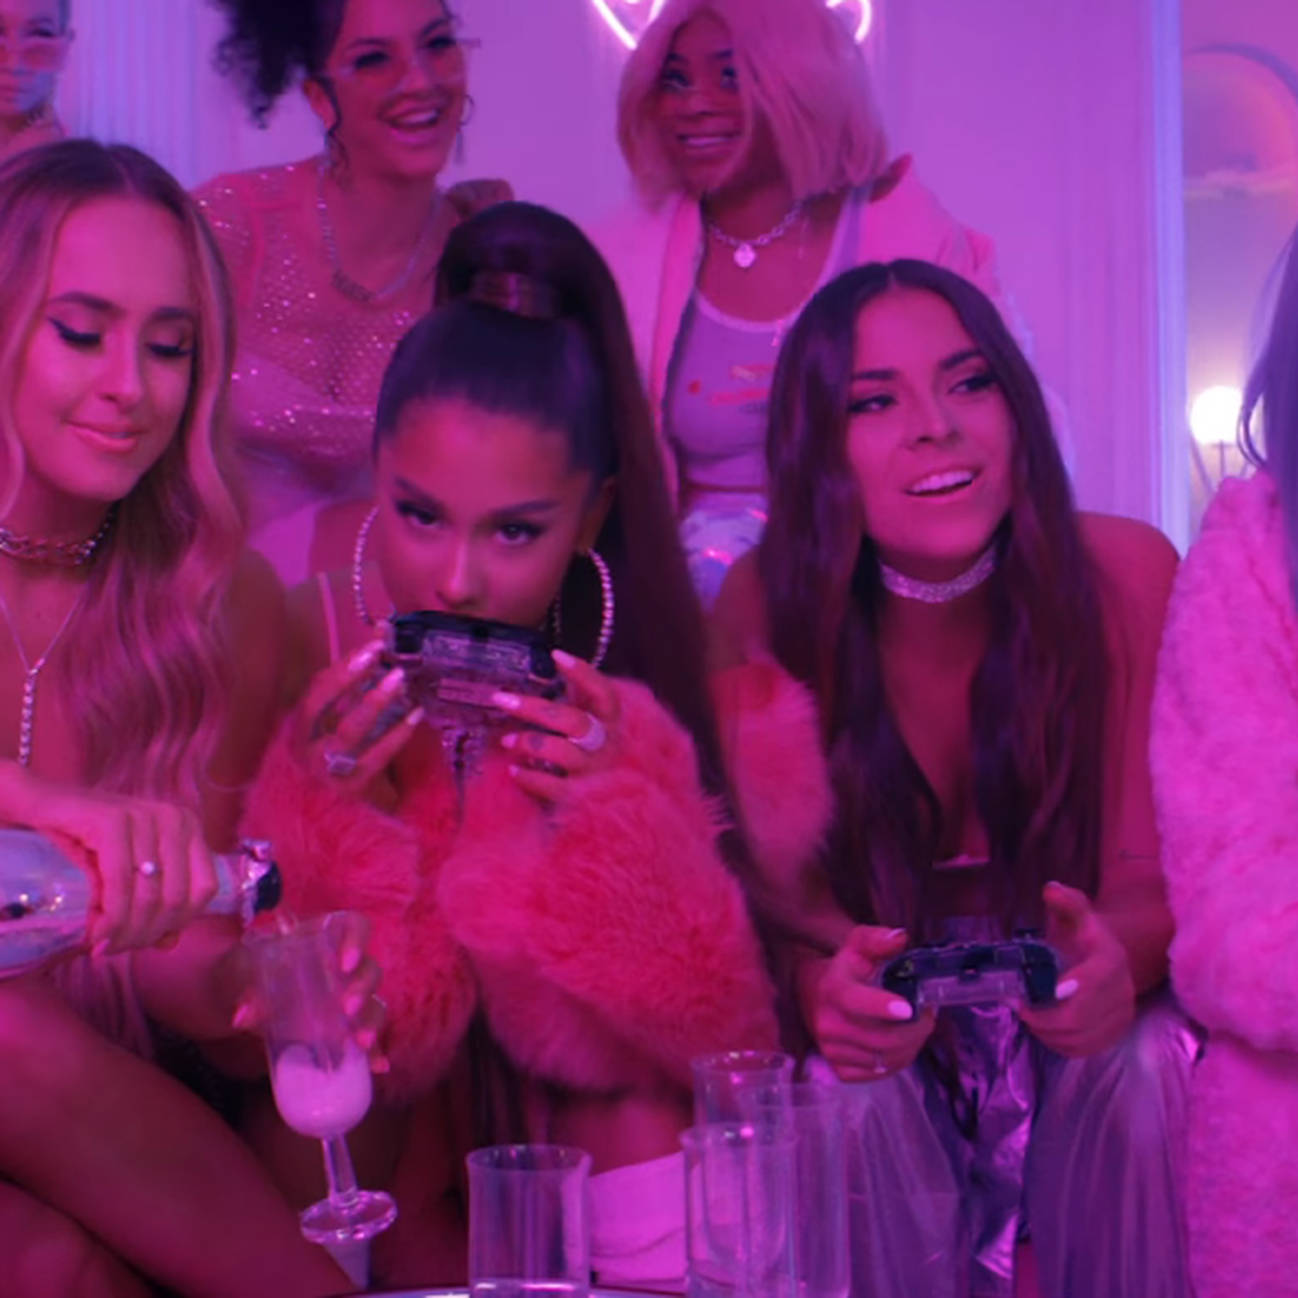 verraad Afkorting gokken Who are Ariana Grande's '7 Rings' friends? A guide to her BFFs in the music  video - PopBuzz